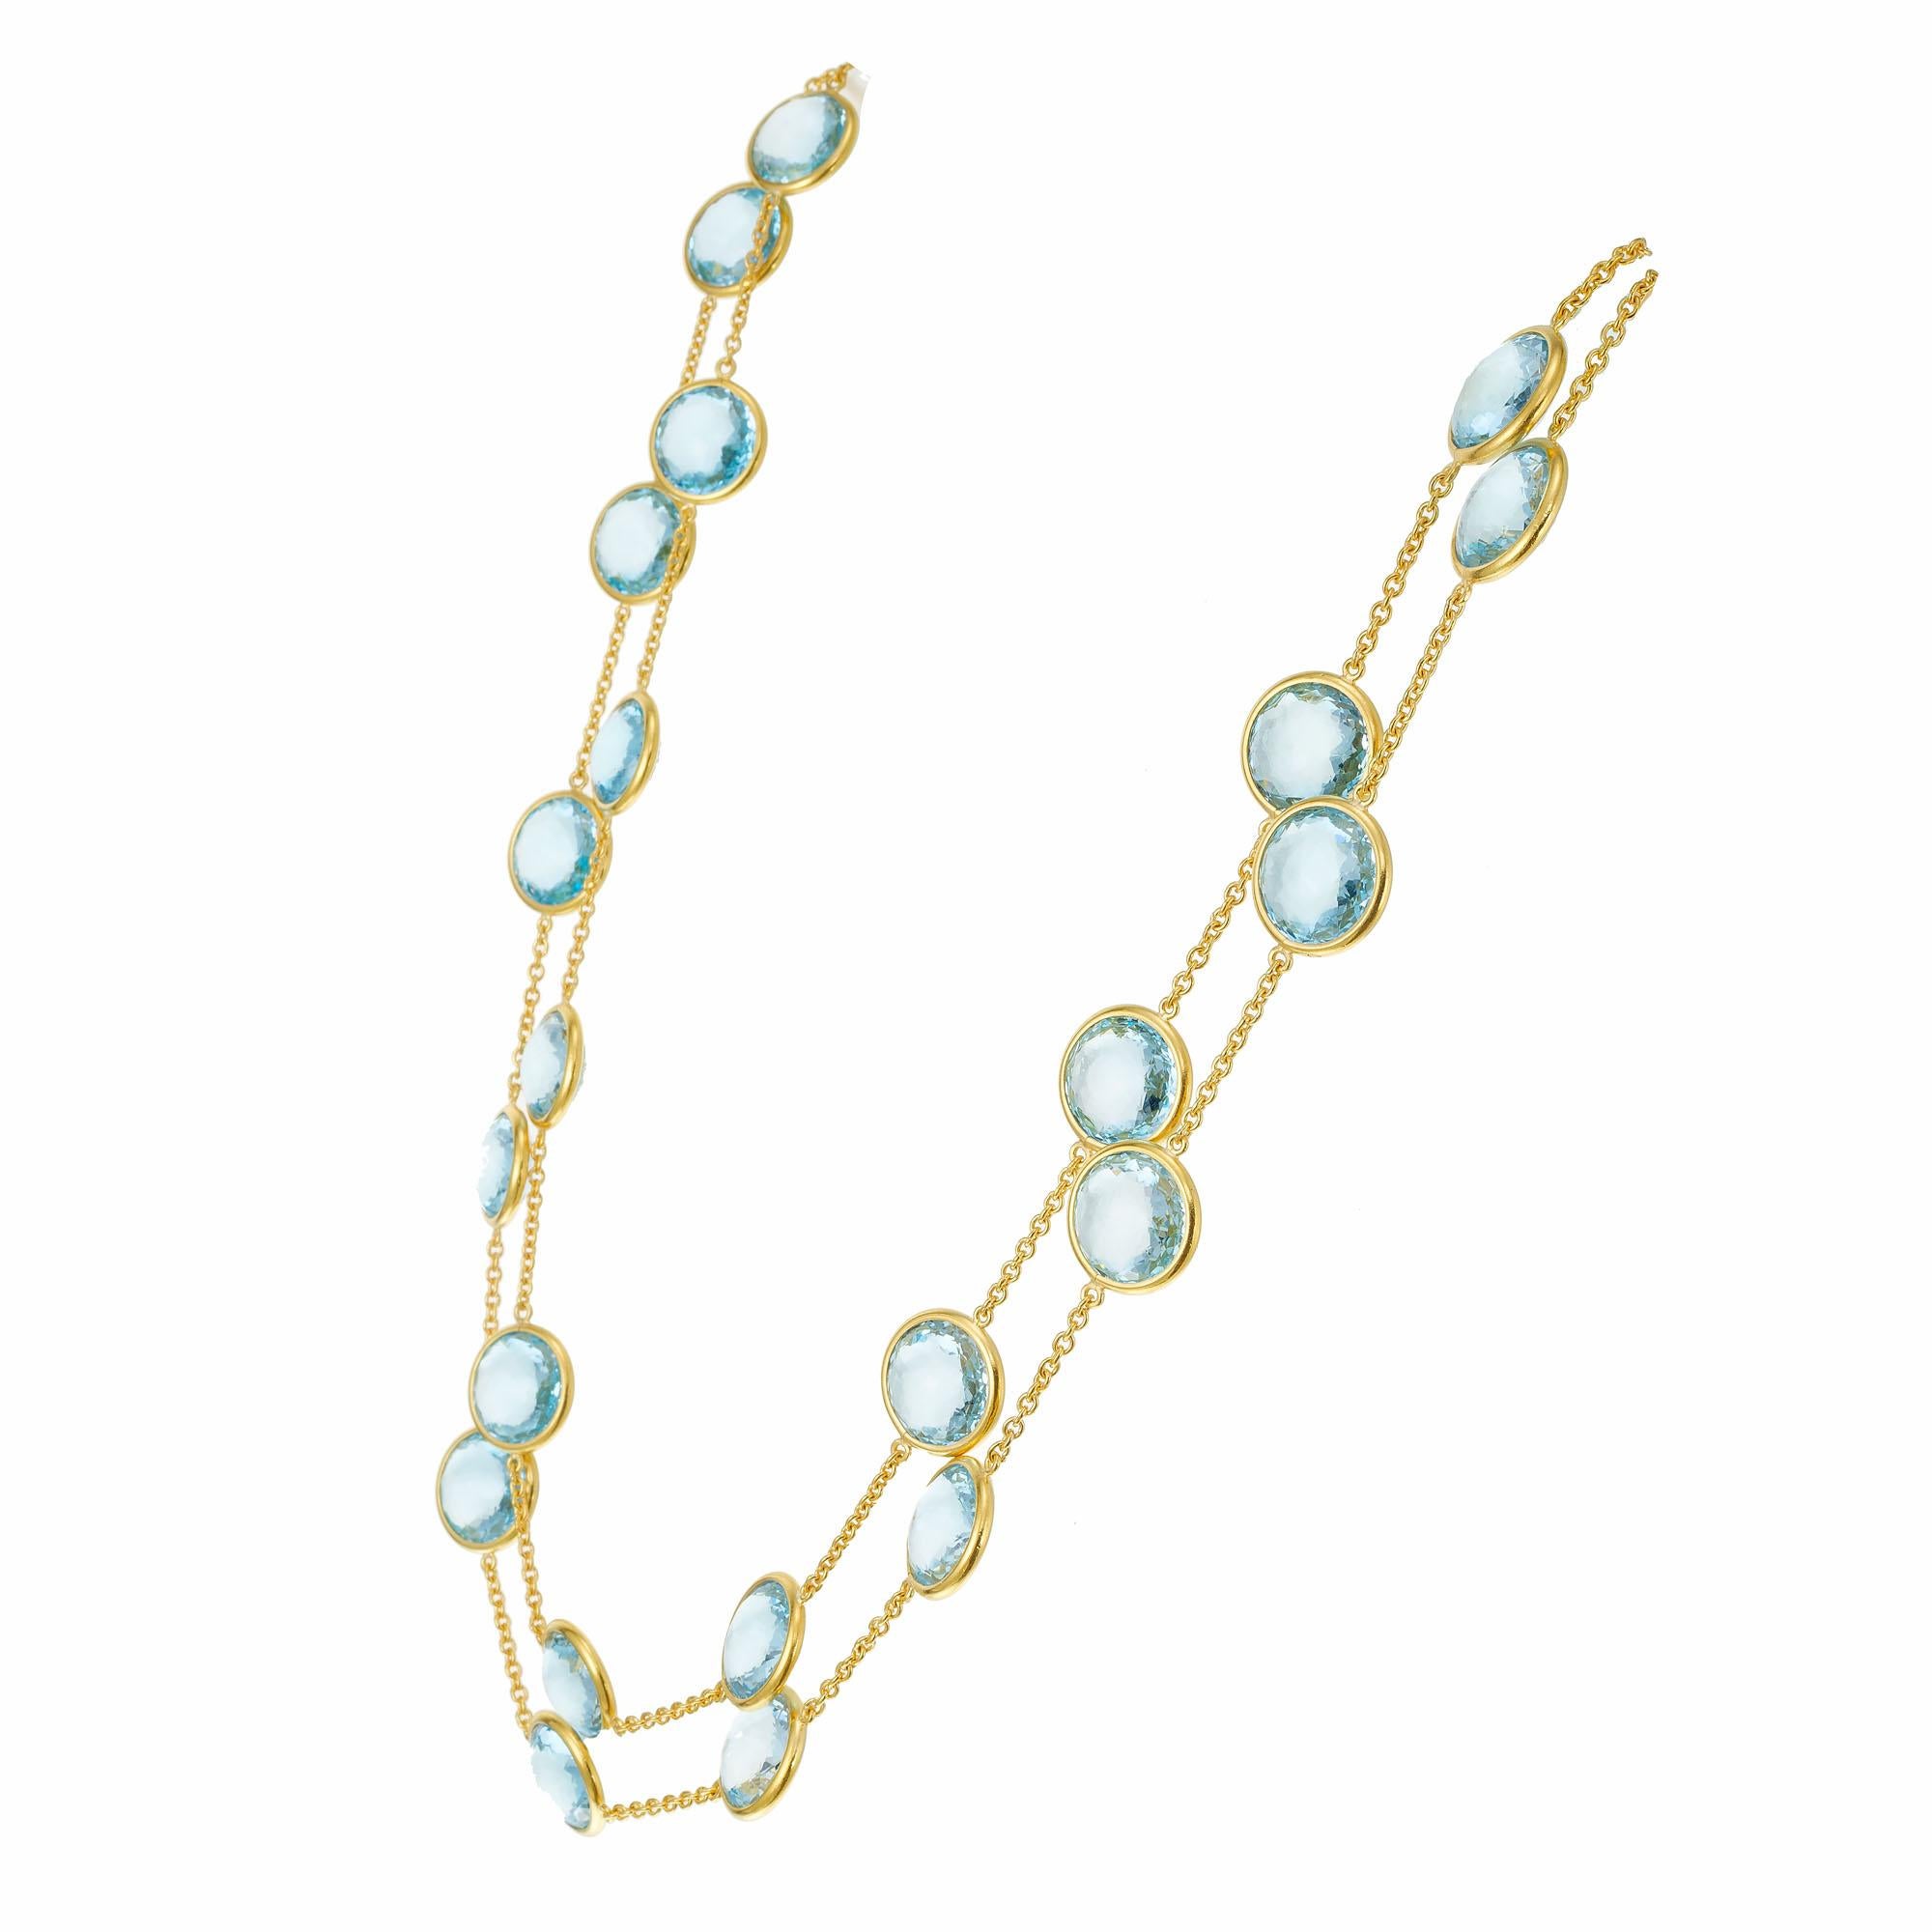 Topaz station necklace. 29 double faceted cabochon bezel set blue topaz double sided, by the yard necklace. 18k yellow gold with a toggle catch. Can be worn long or doubled. 40 inches long. 

29 round double faceted cabochon blue topaz, VS approx.